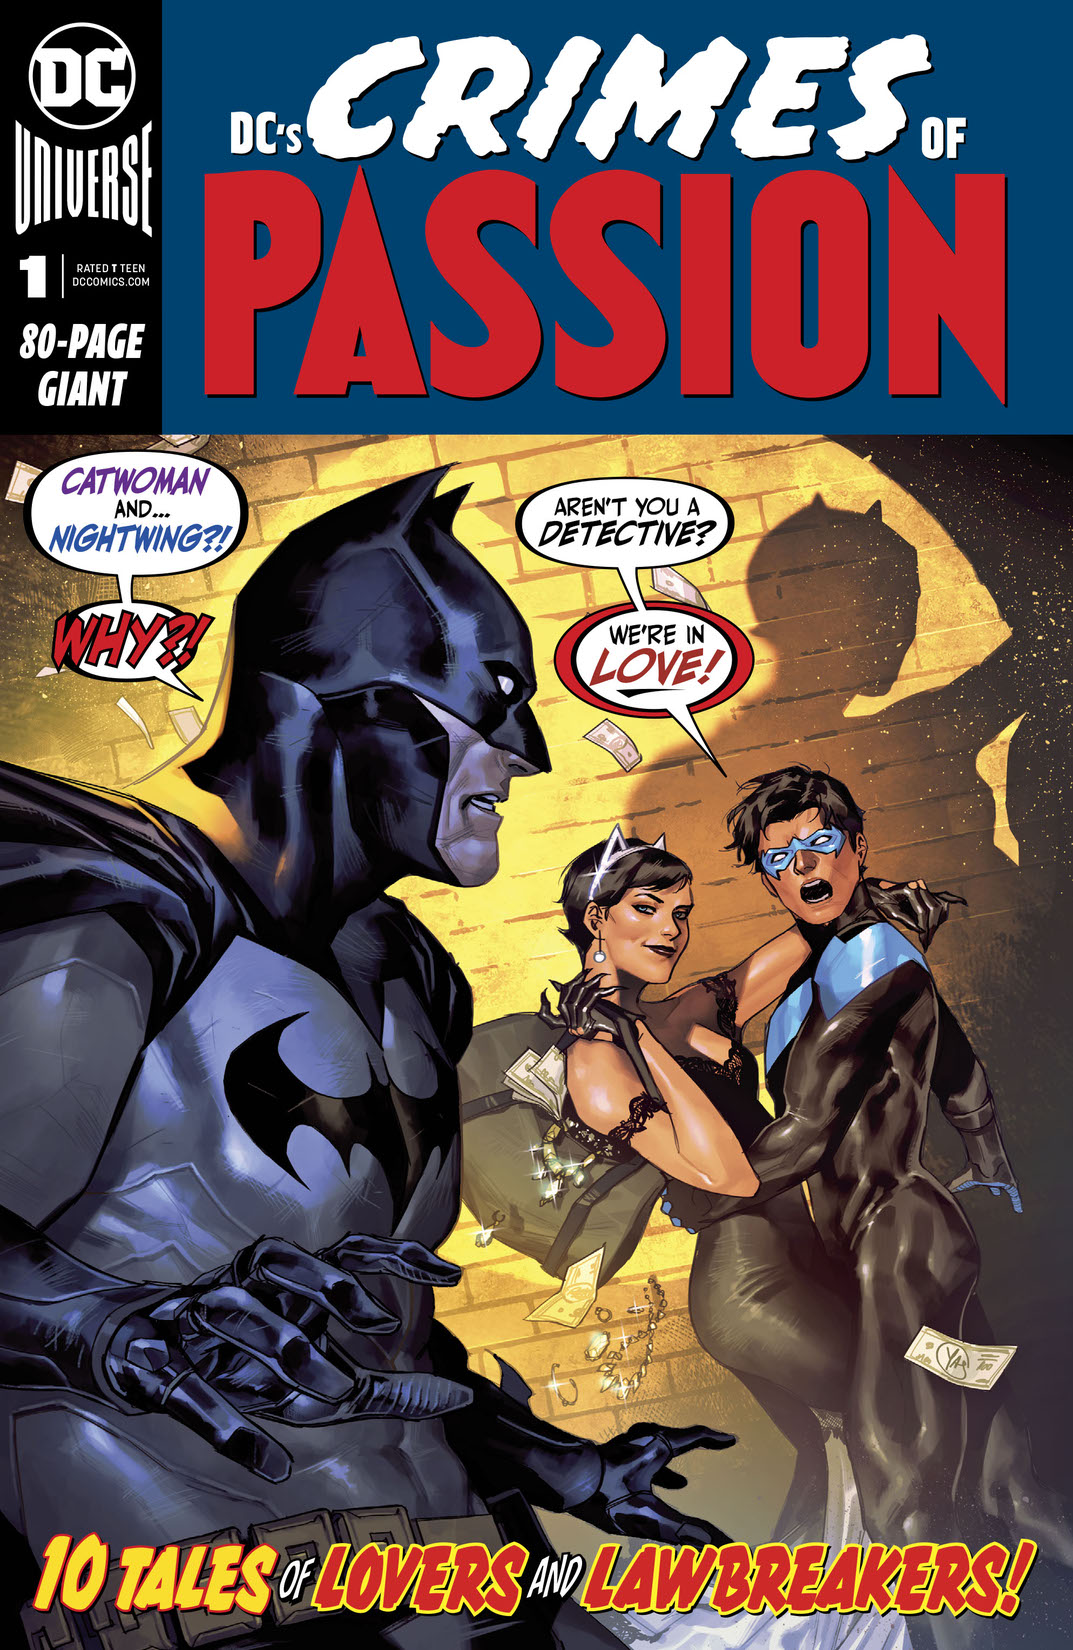 DC's Crimes of Passion #1 preview images